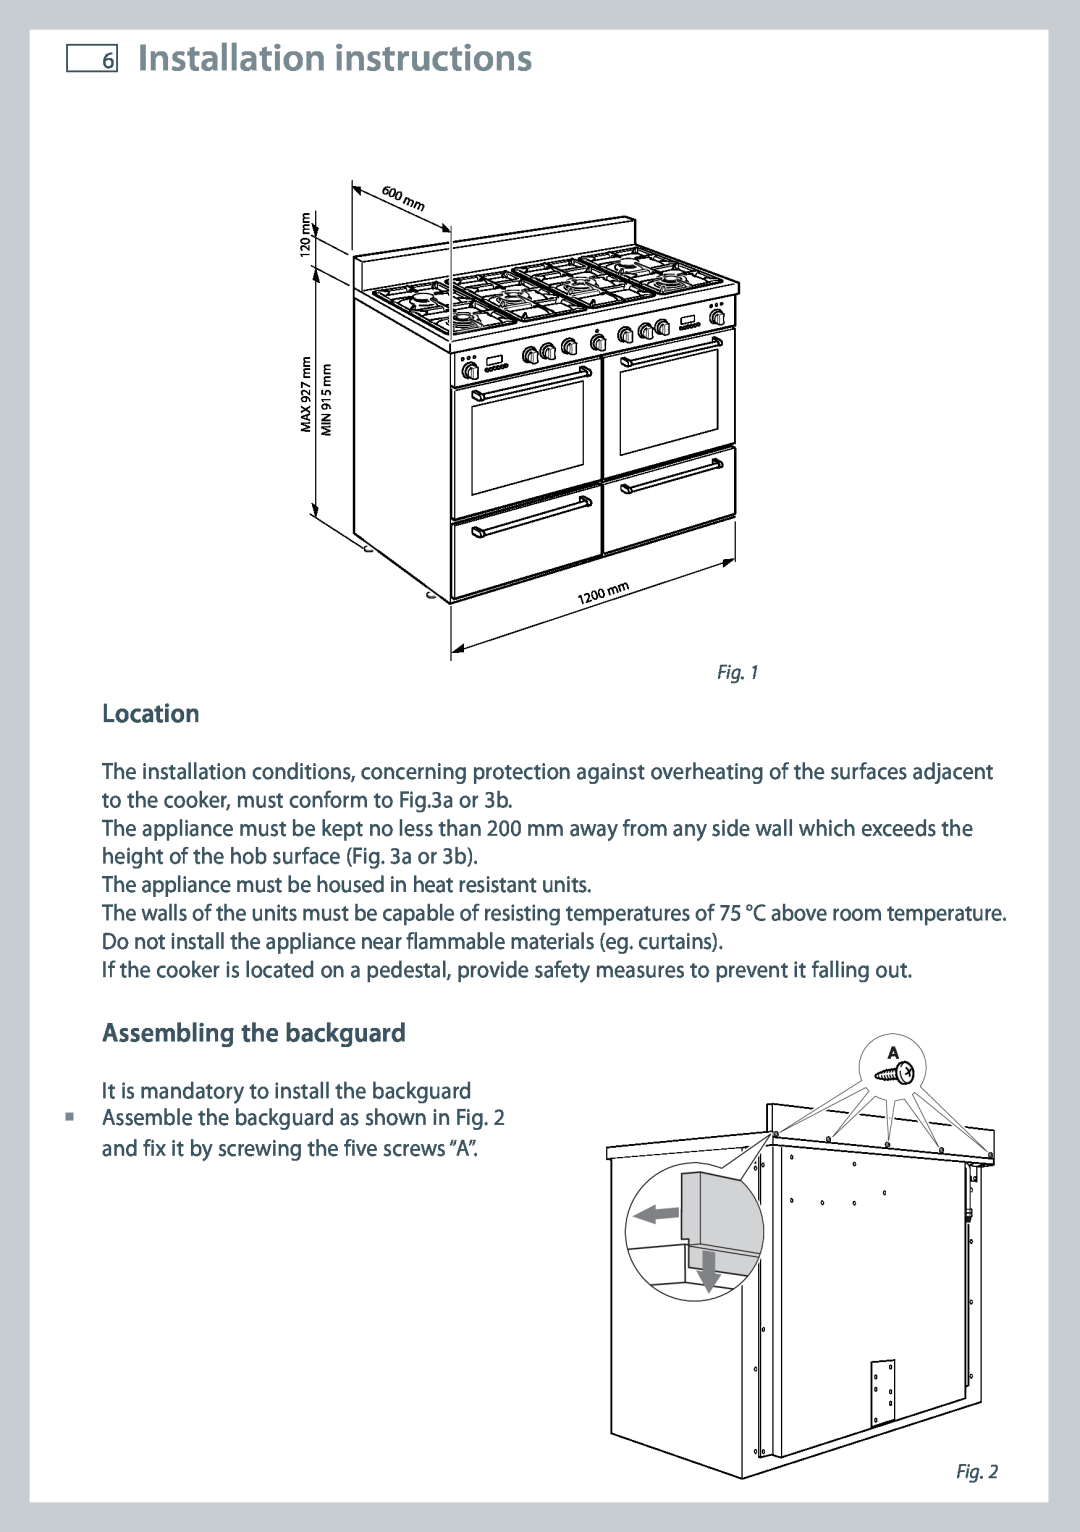 Fisher & Paykel OR120 installation instructions Installation instructions, Location, Assembling the backguard 